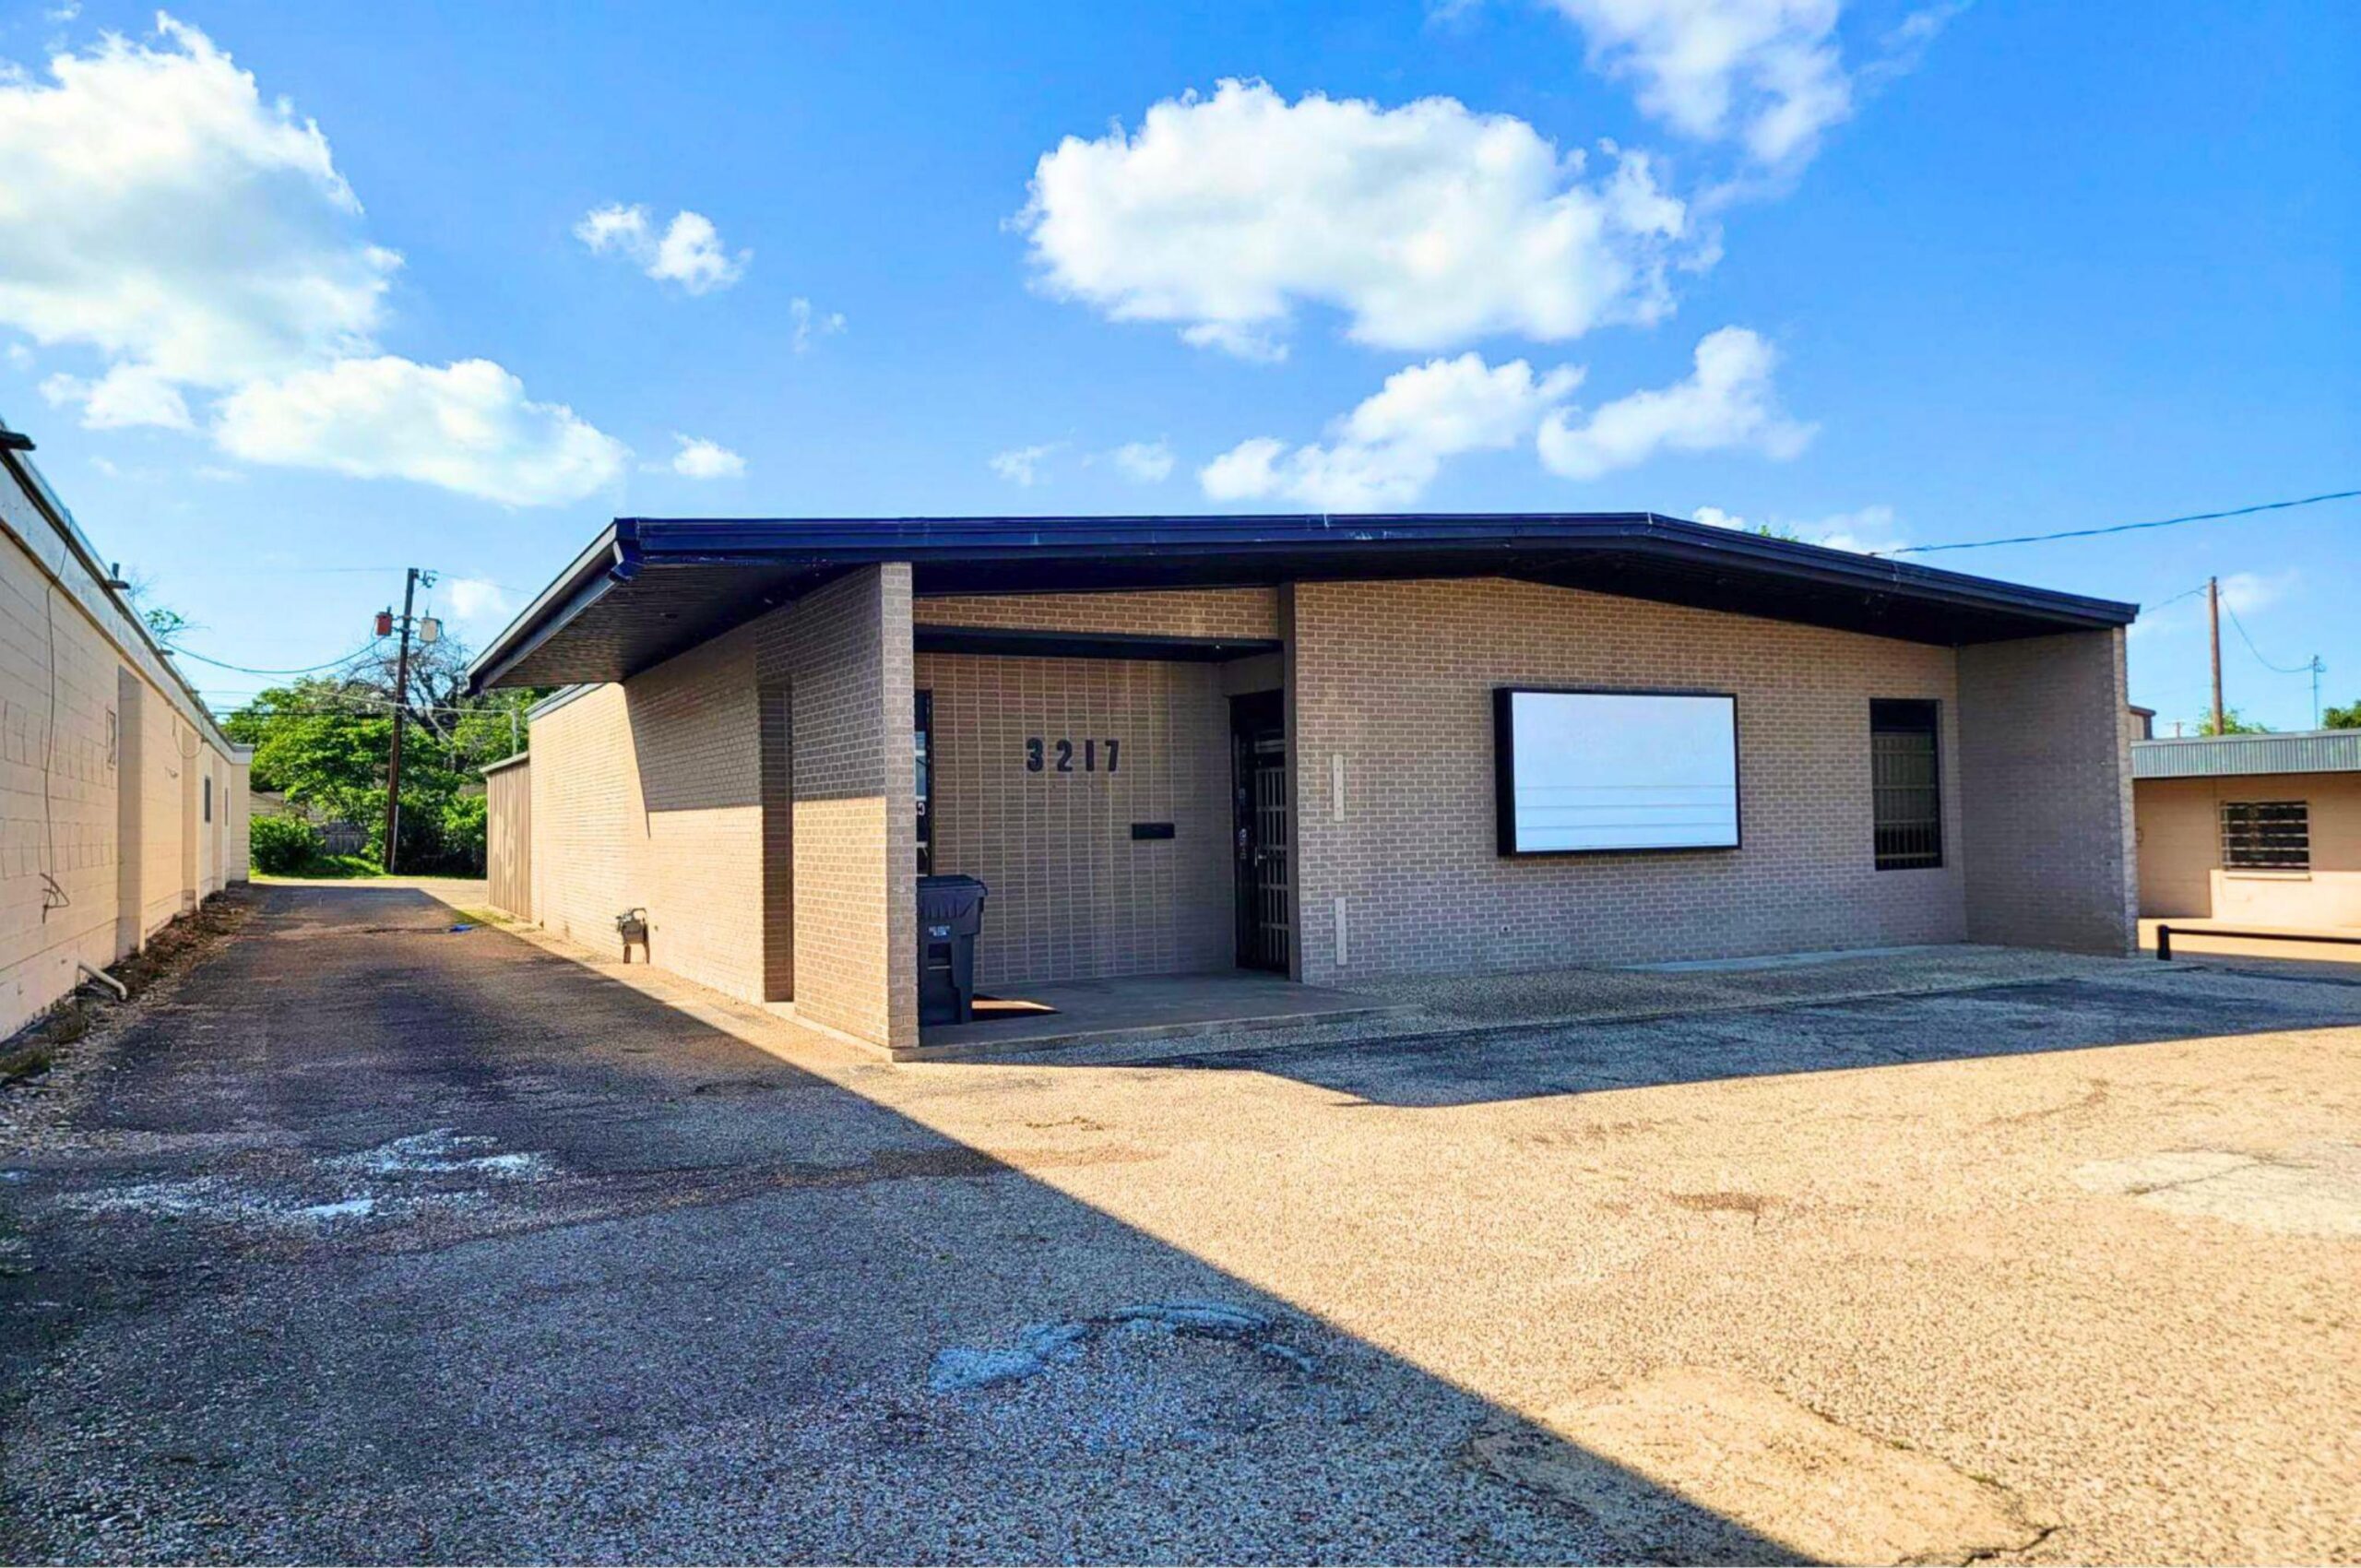 Office/Warehouse space for lease at Franklin Ave in Waco, Texas